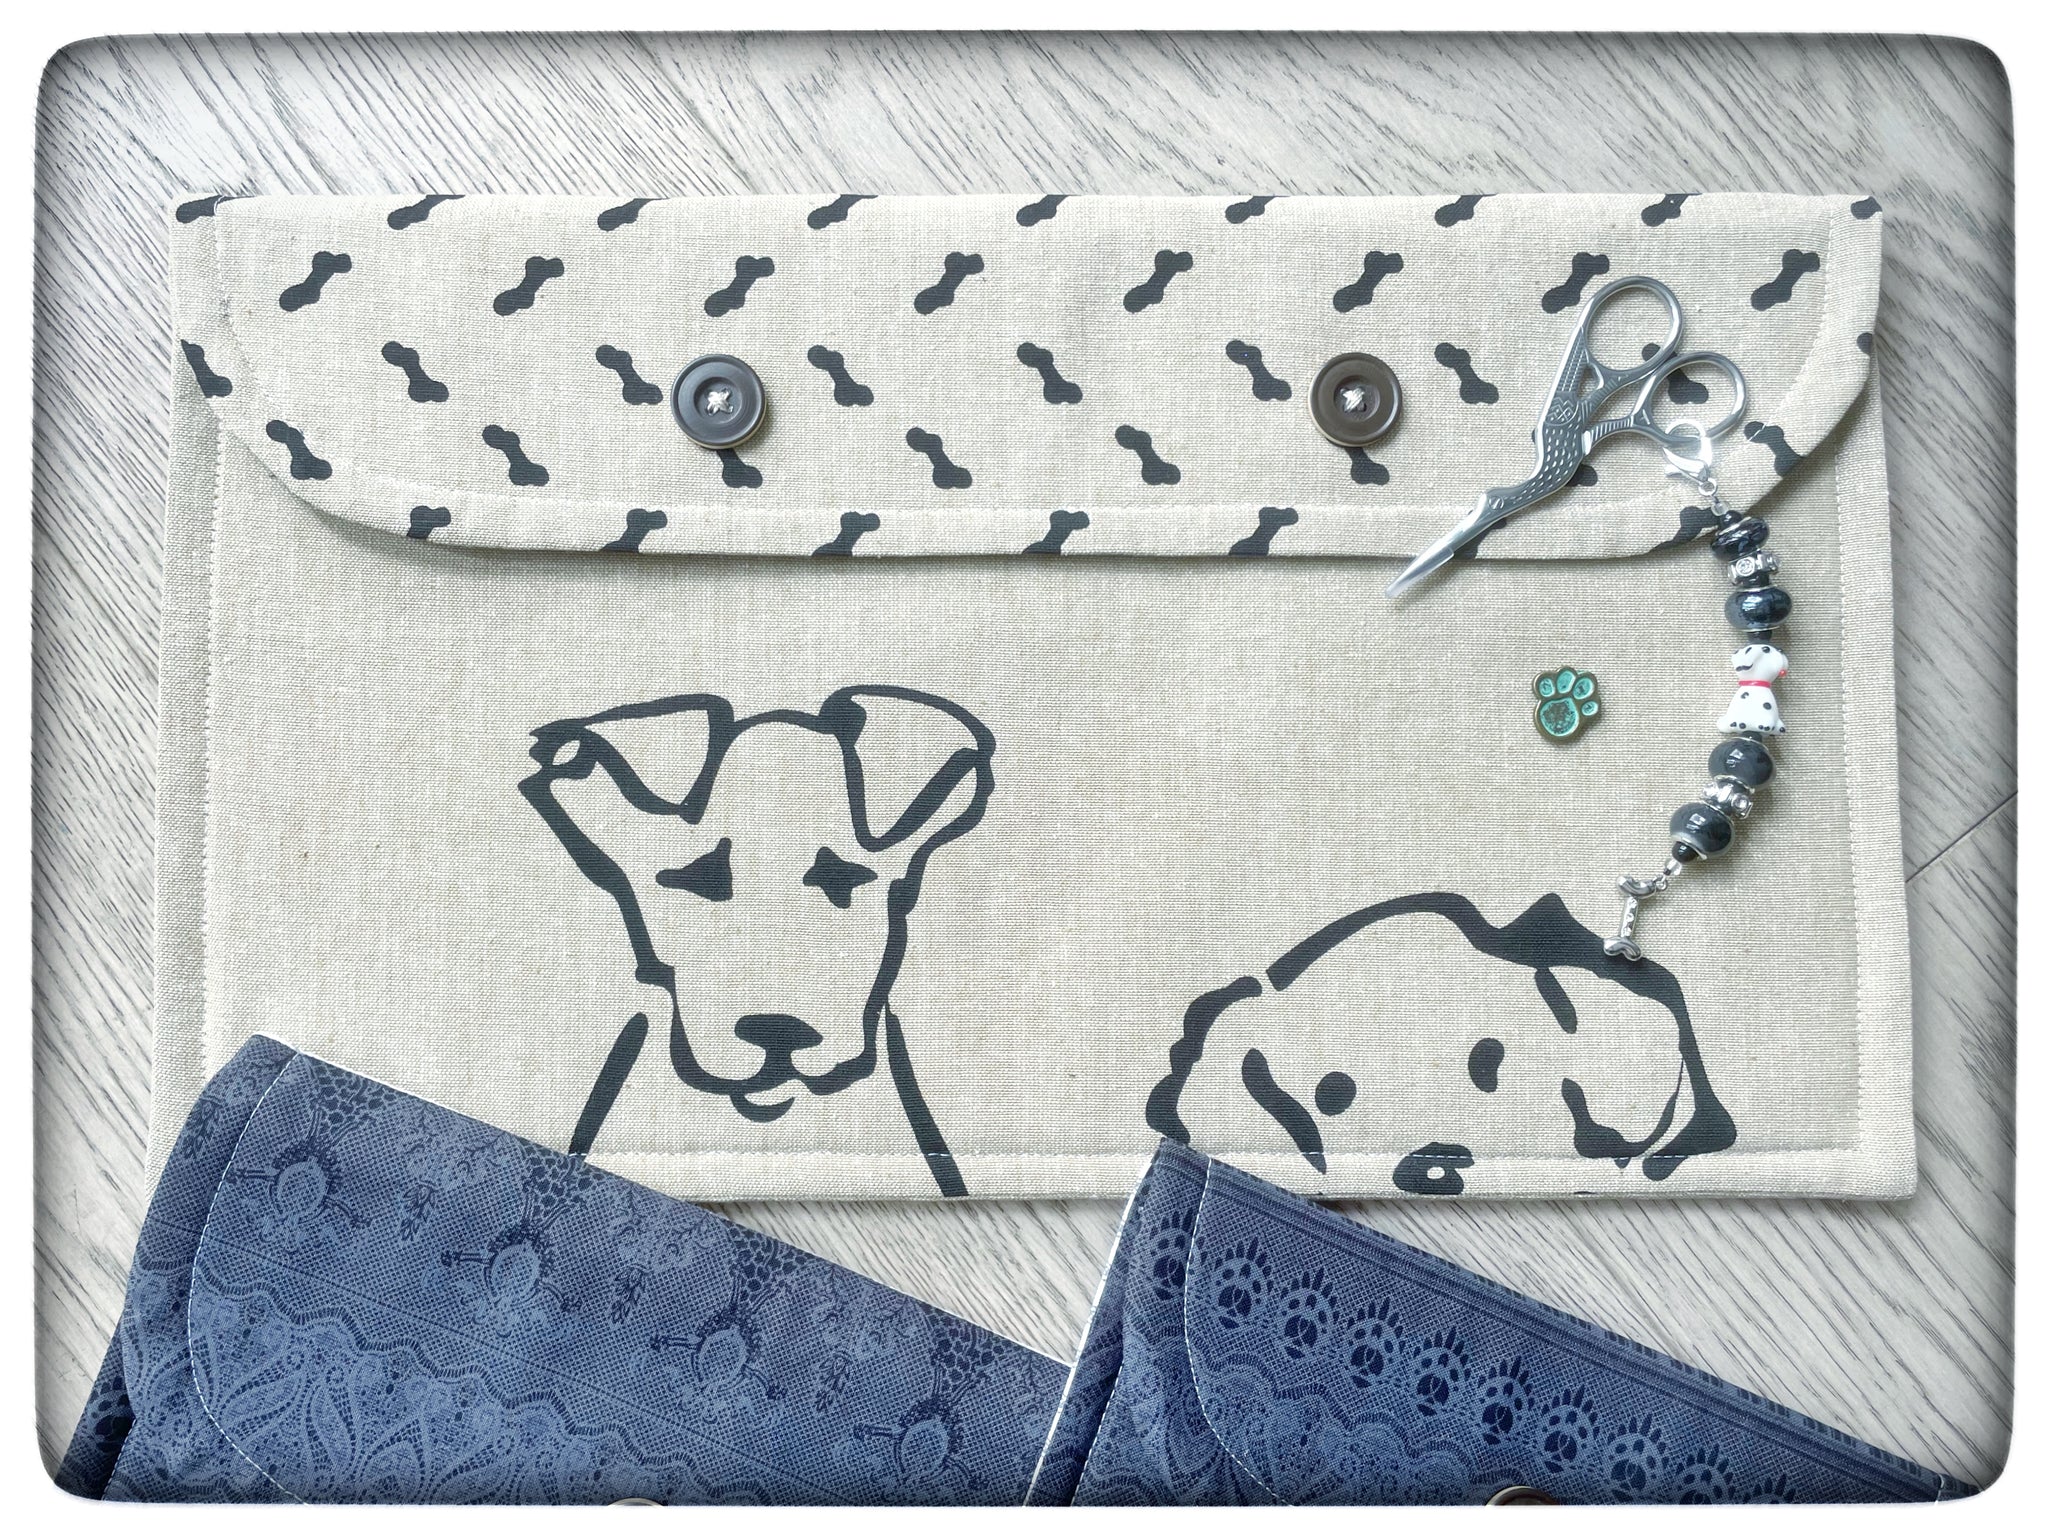 You had me at woof needlework set - 6 pieces